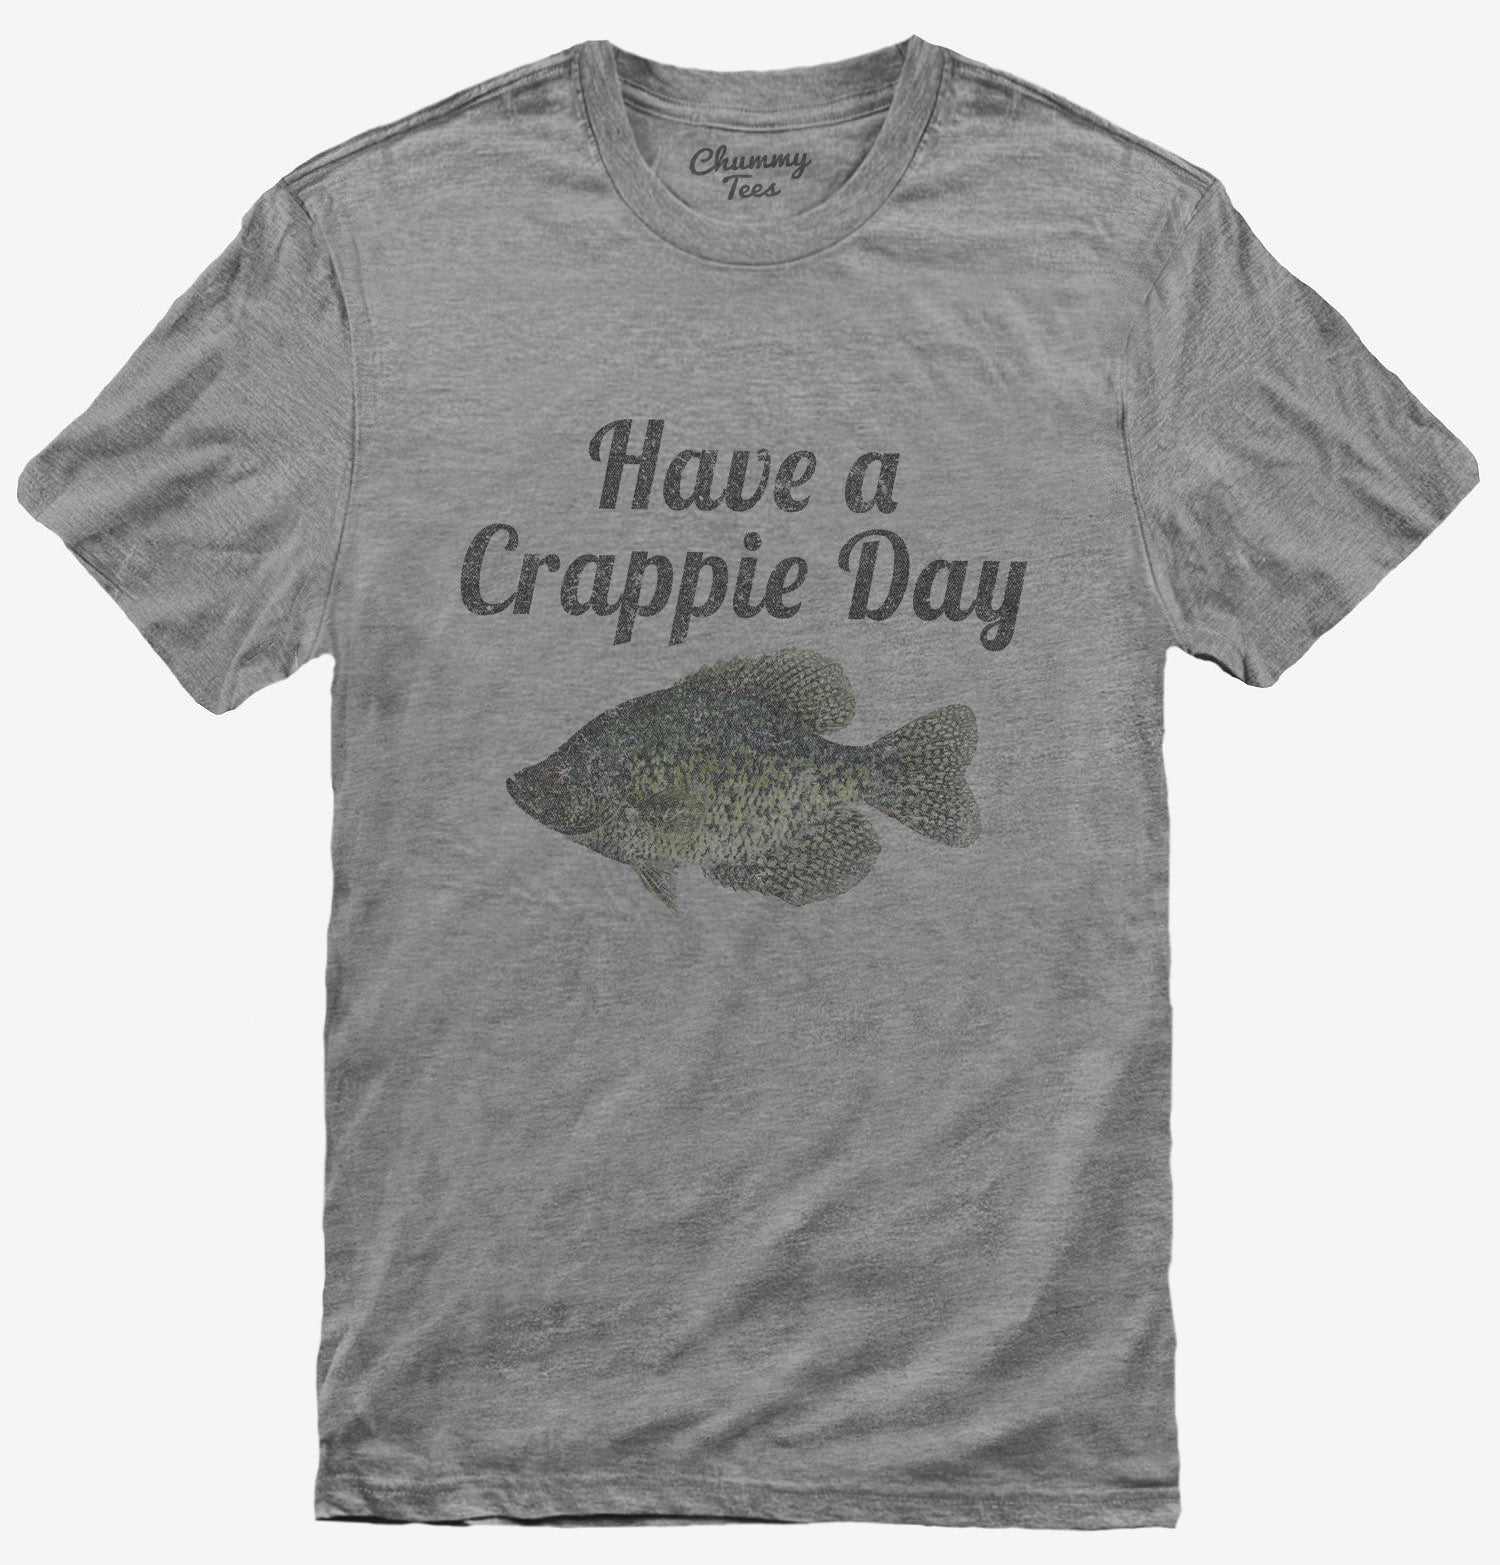 So Good With My Rod I Make Fish Come – Funny Fishing Shirt-CL